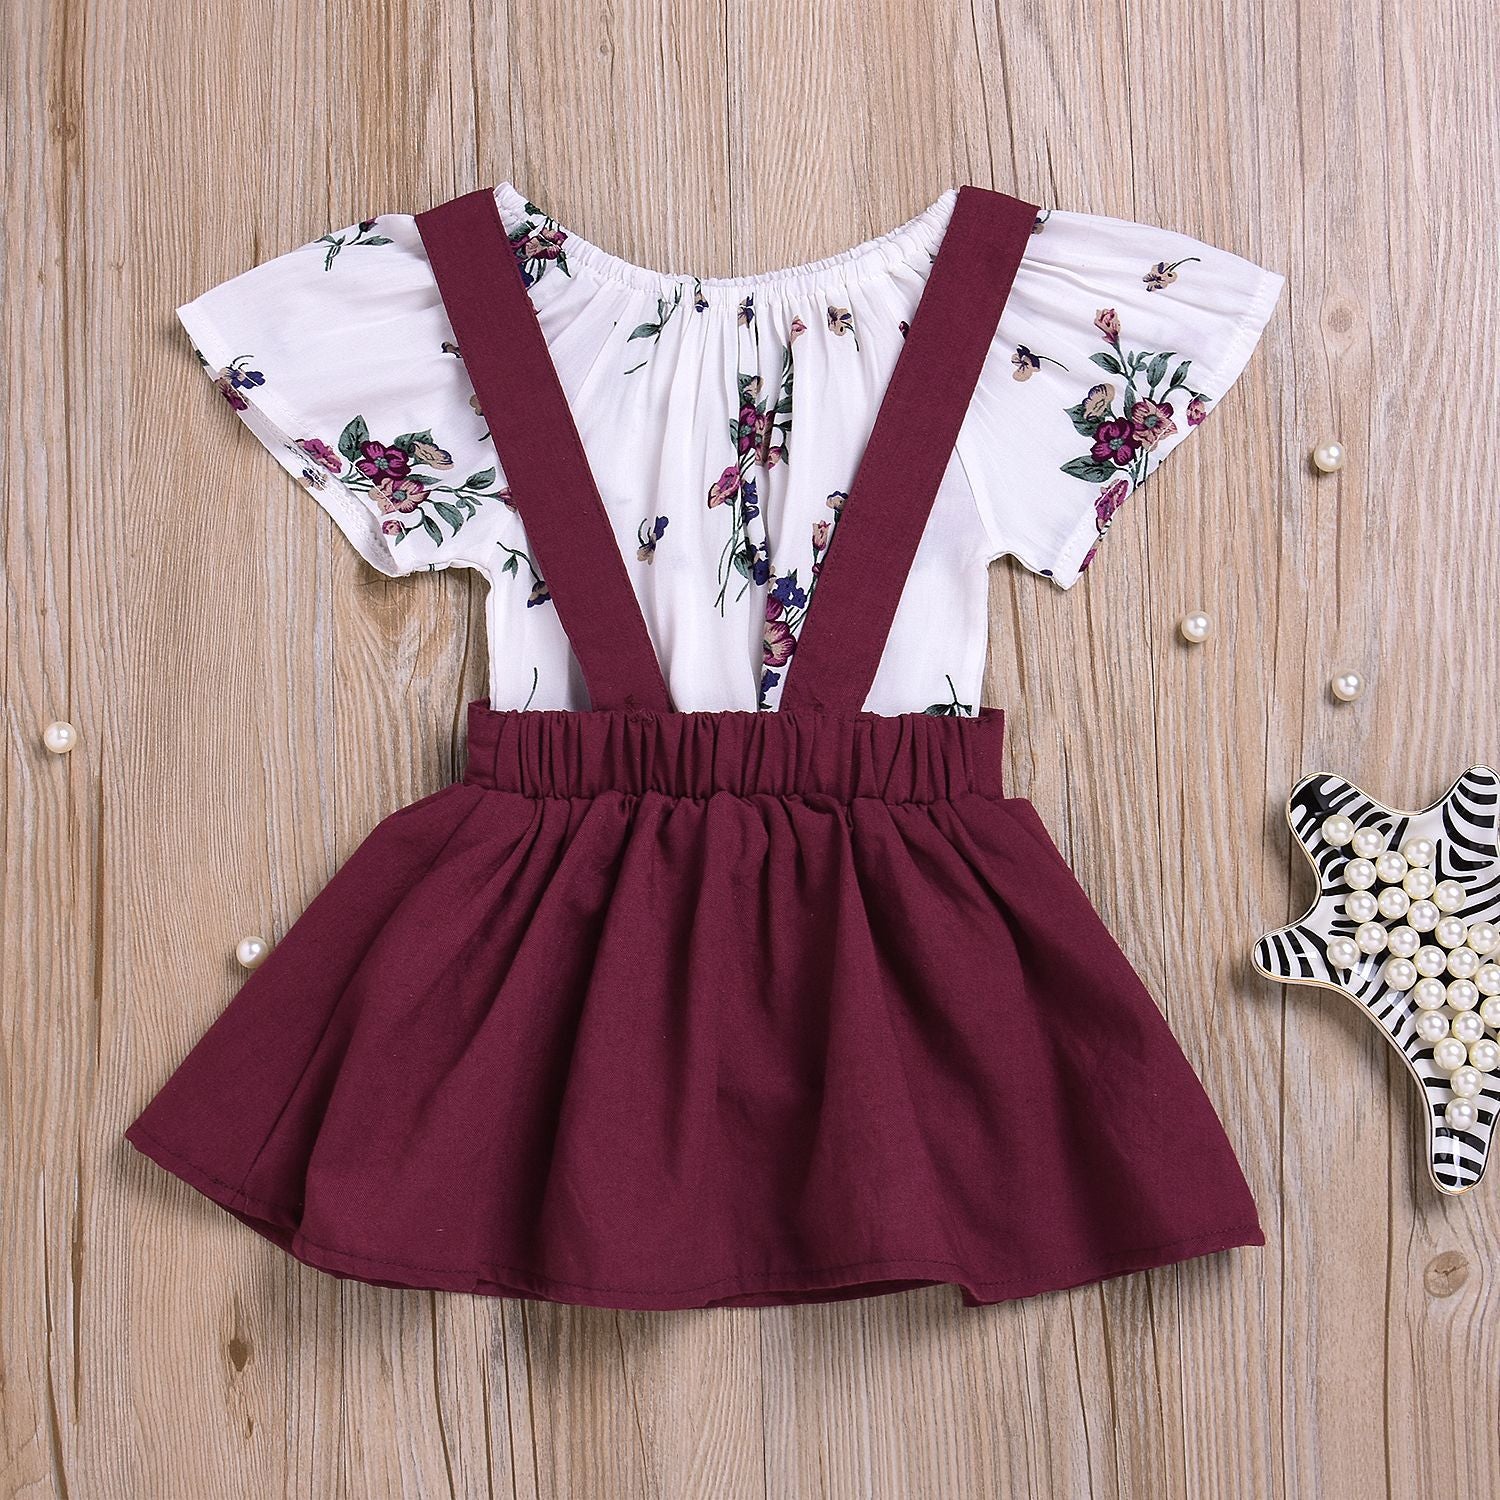 Patricia Floral Set Toddler Kids Baby Girls Floral Romper Suspender Skirt Overalls 2PCS Outfits Baby Clothing - TryKid